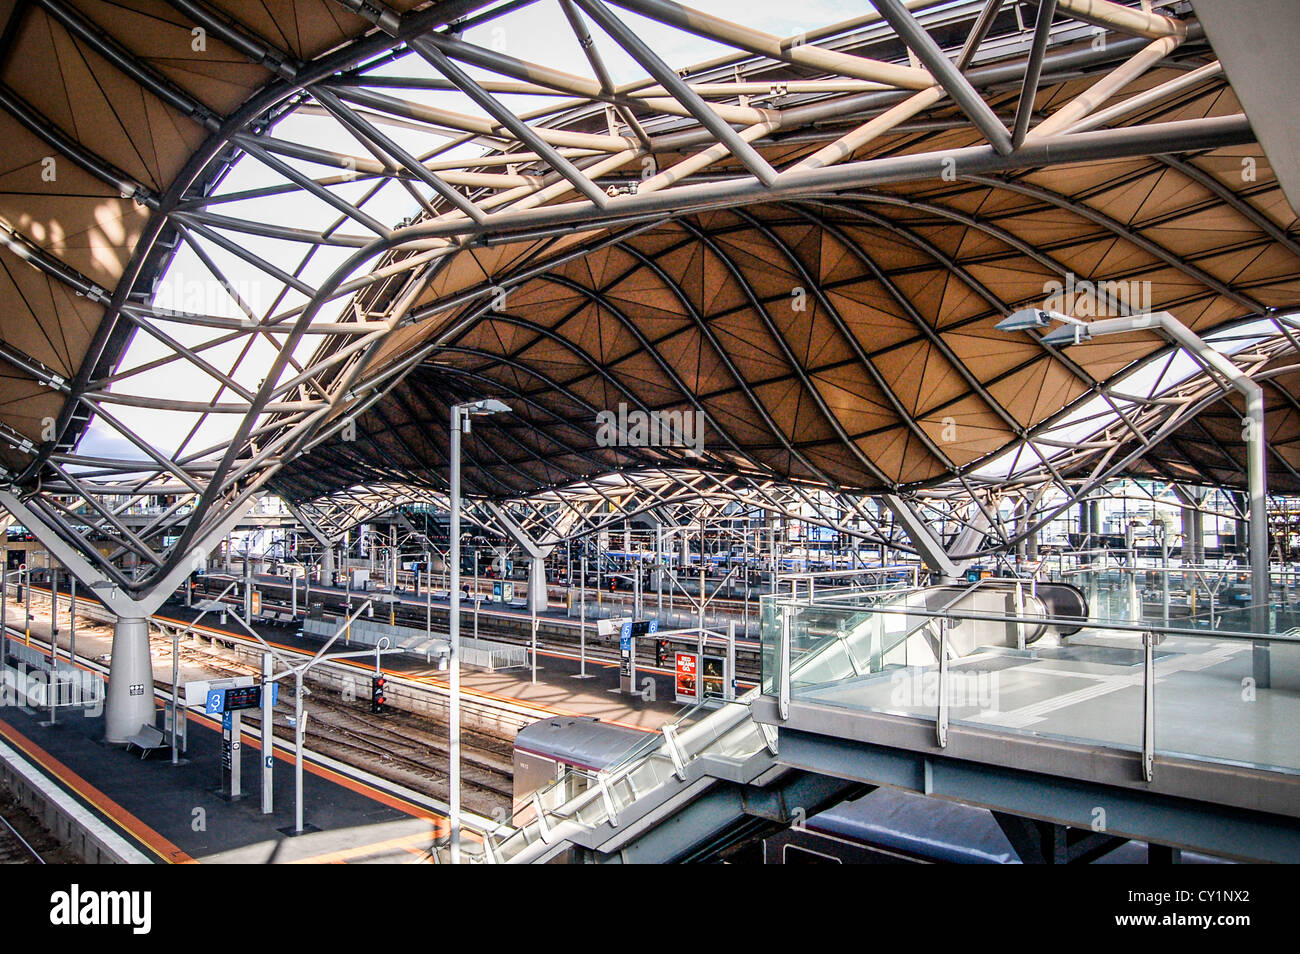 Southern Cross Station in Melbourne, Australia with train tracks and platforms below. Stock Photo